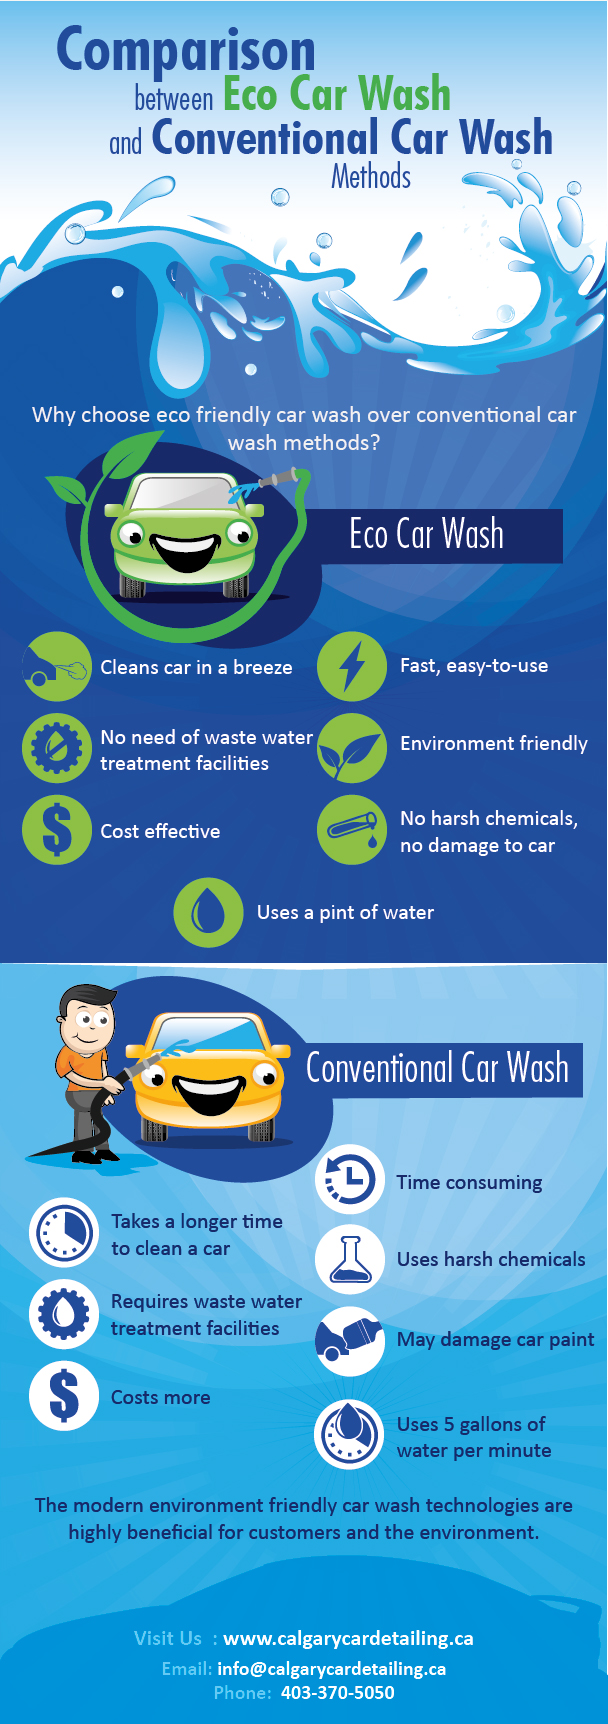 Eco and Conventional Car Wash